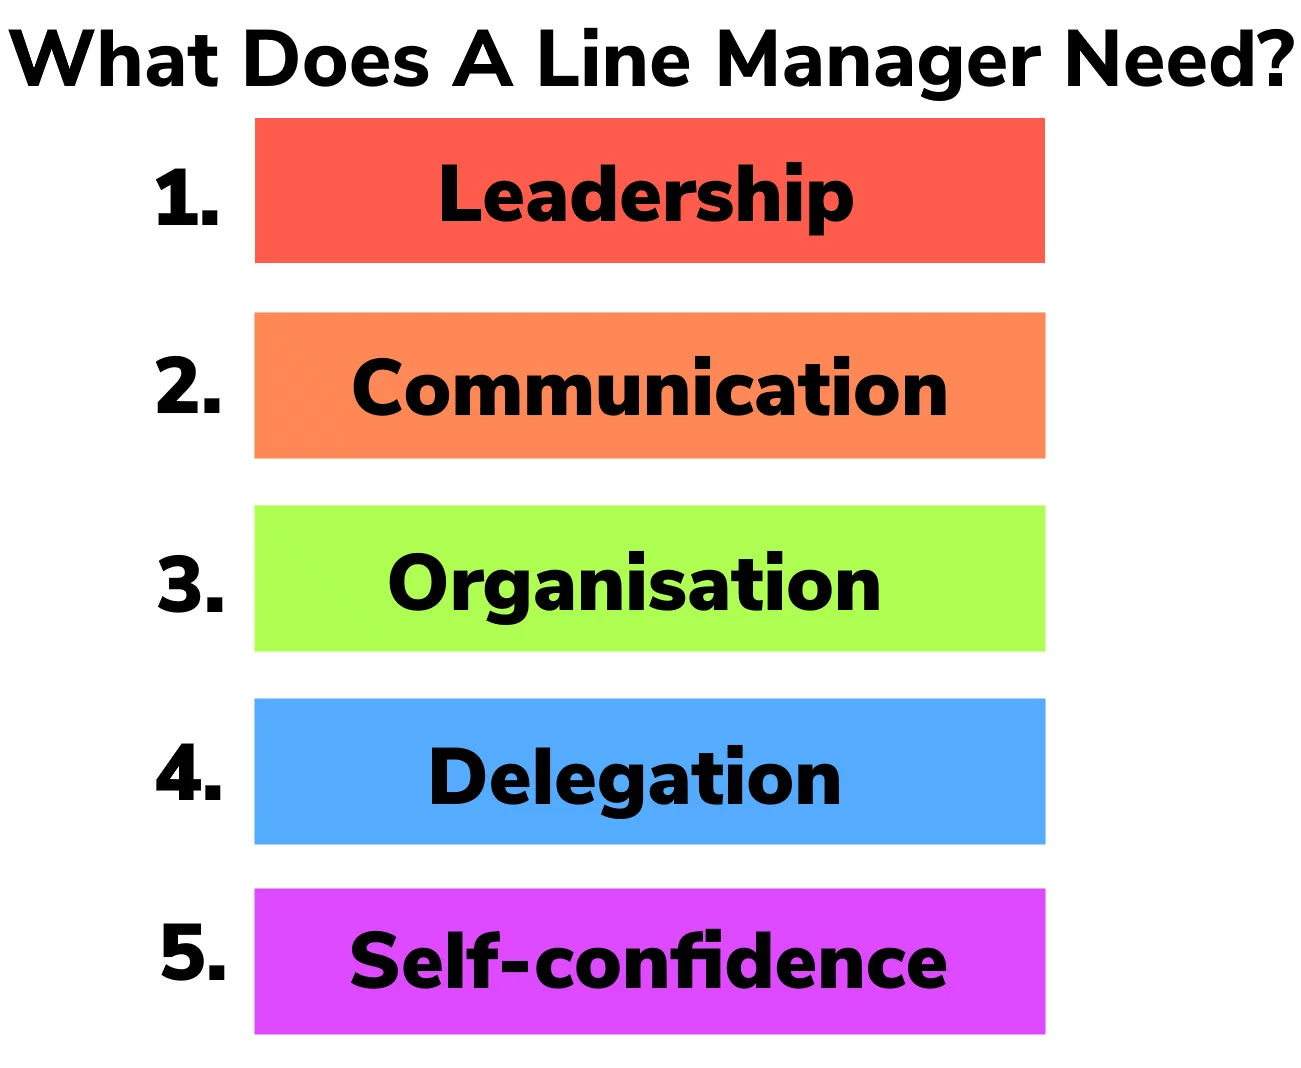 What Does A Line Manager Need infographic